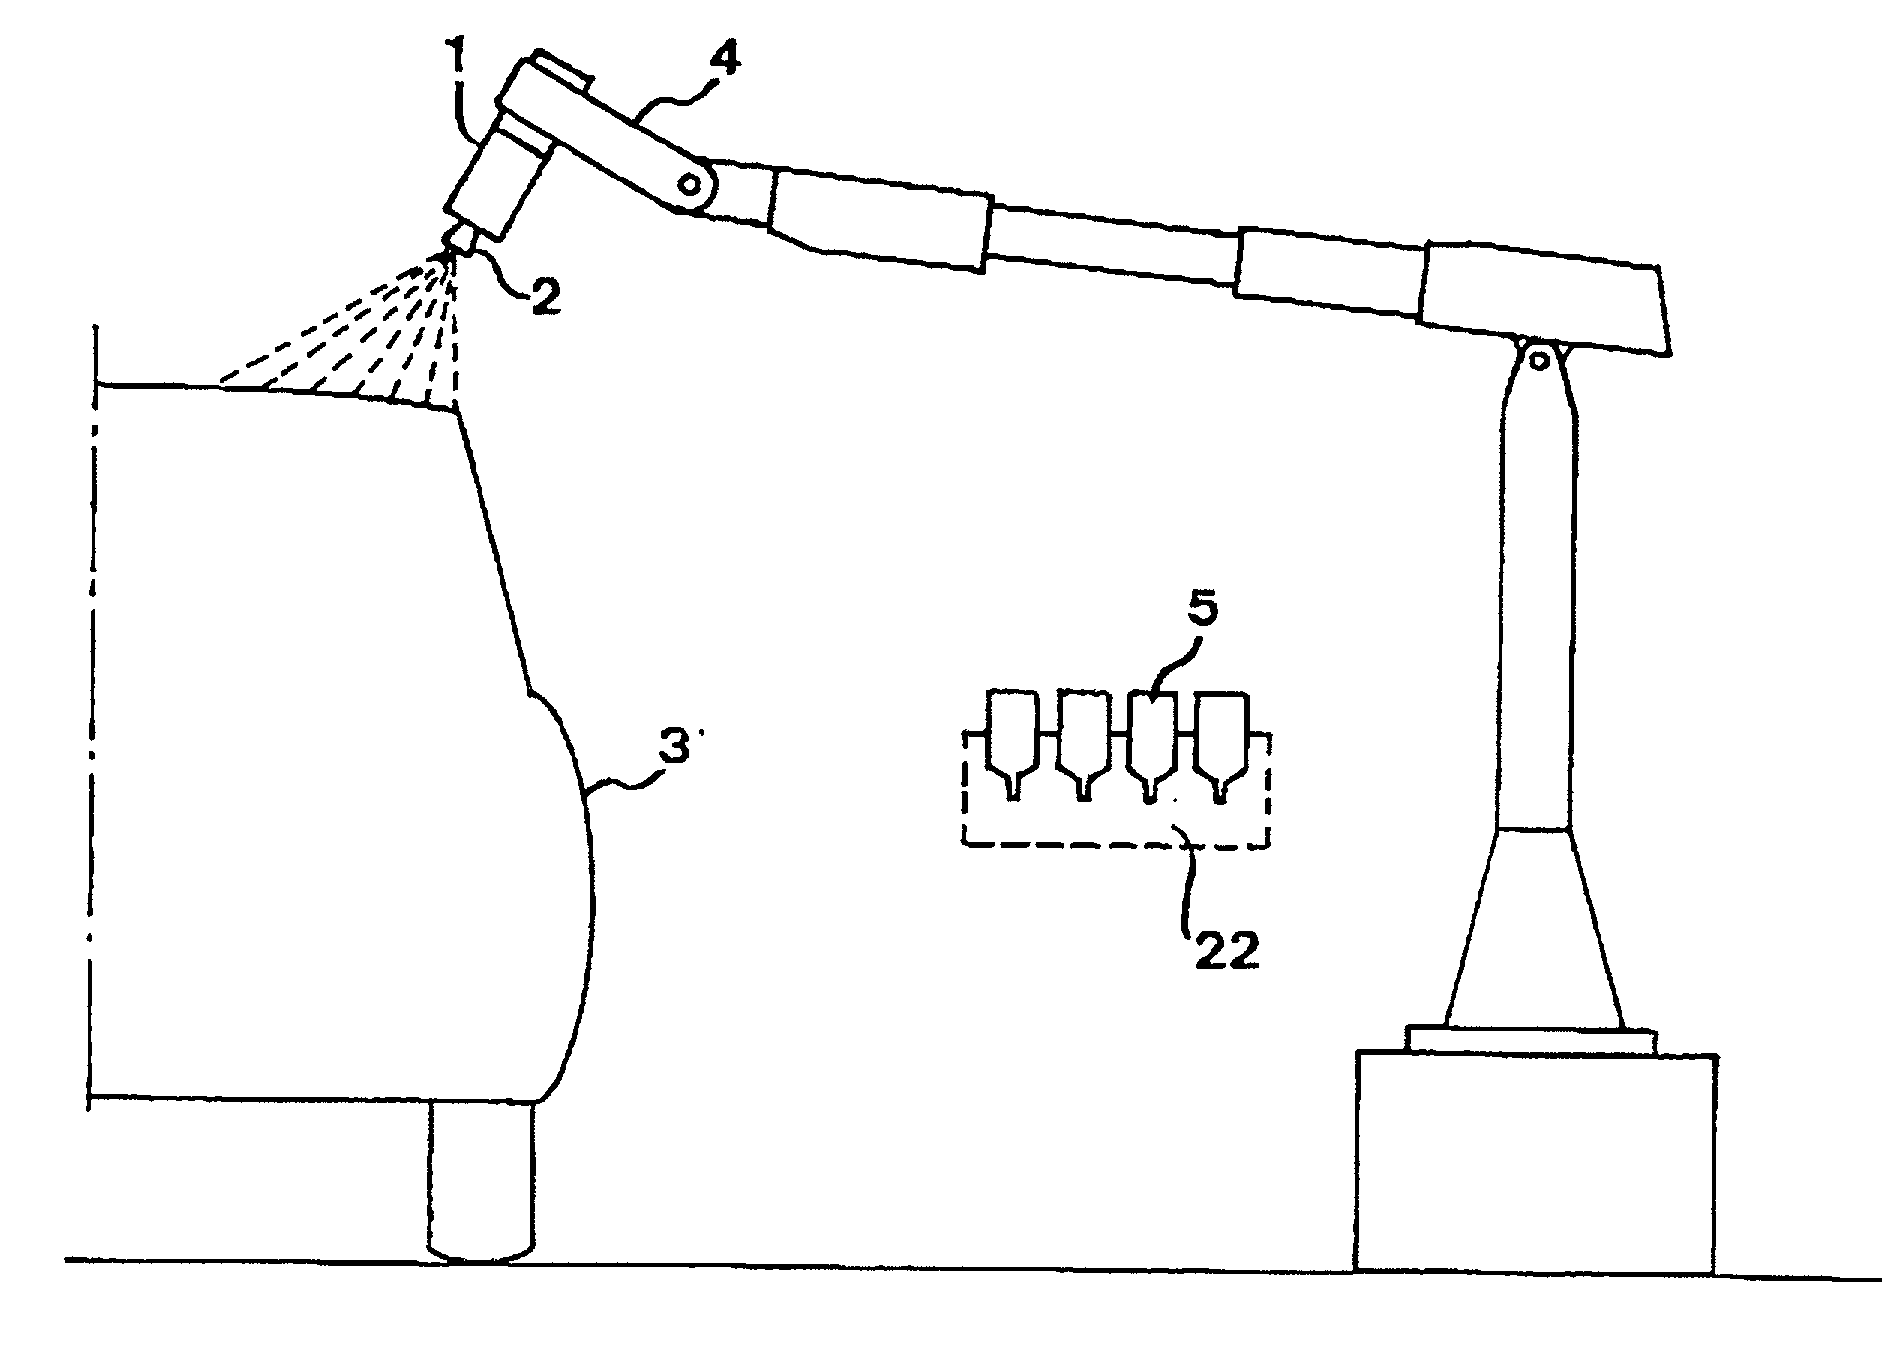 Device for automatic spray application of paint